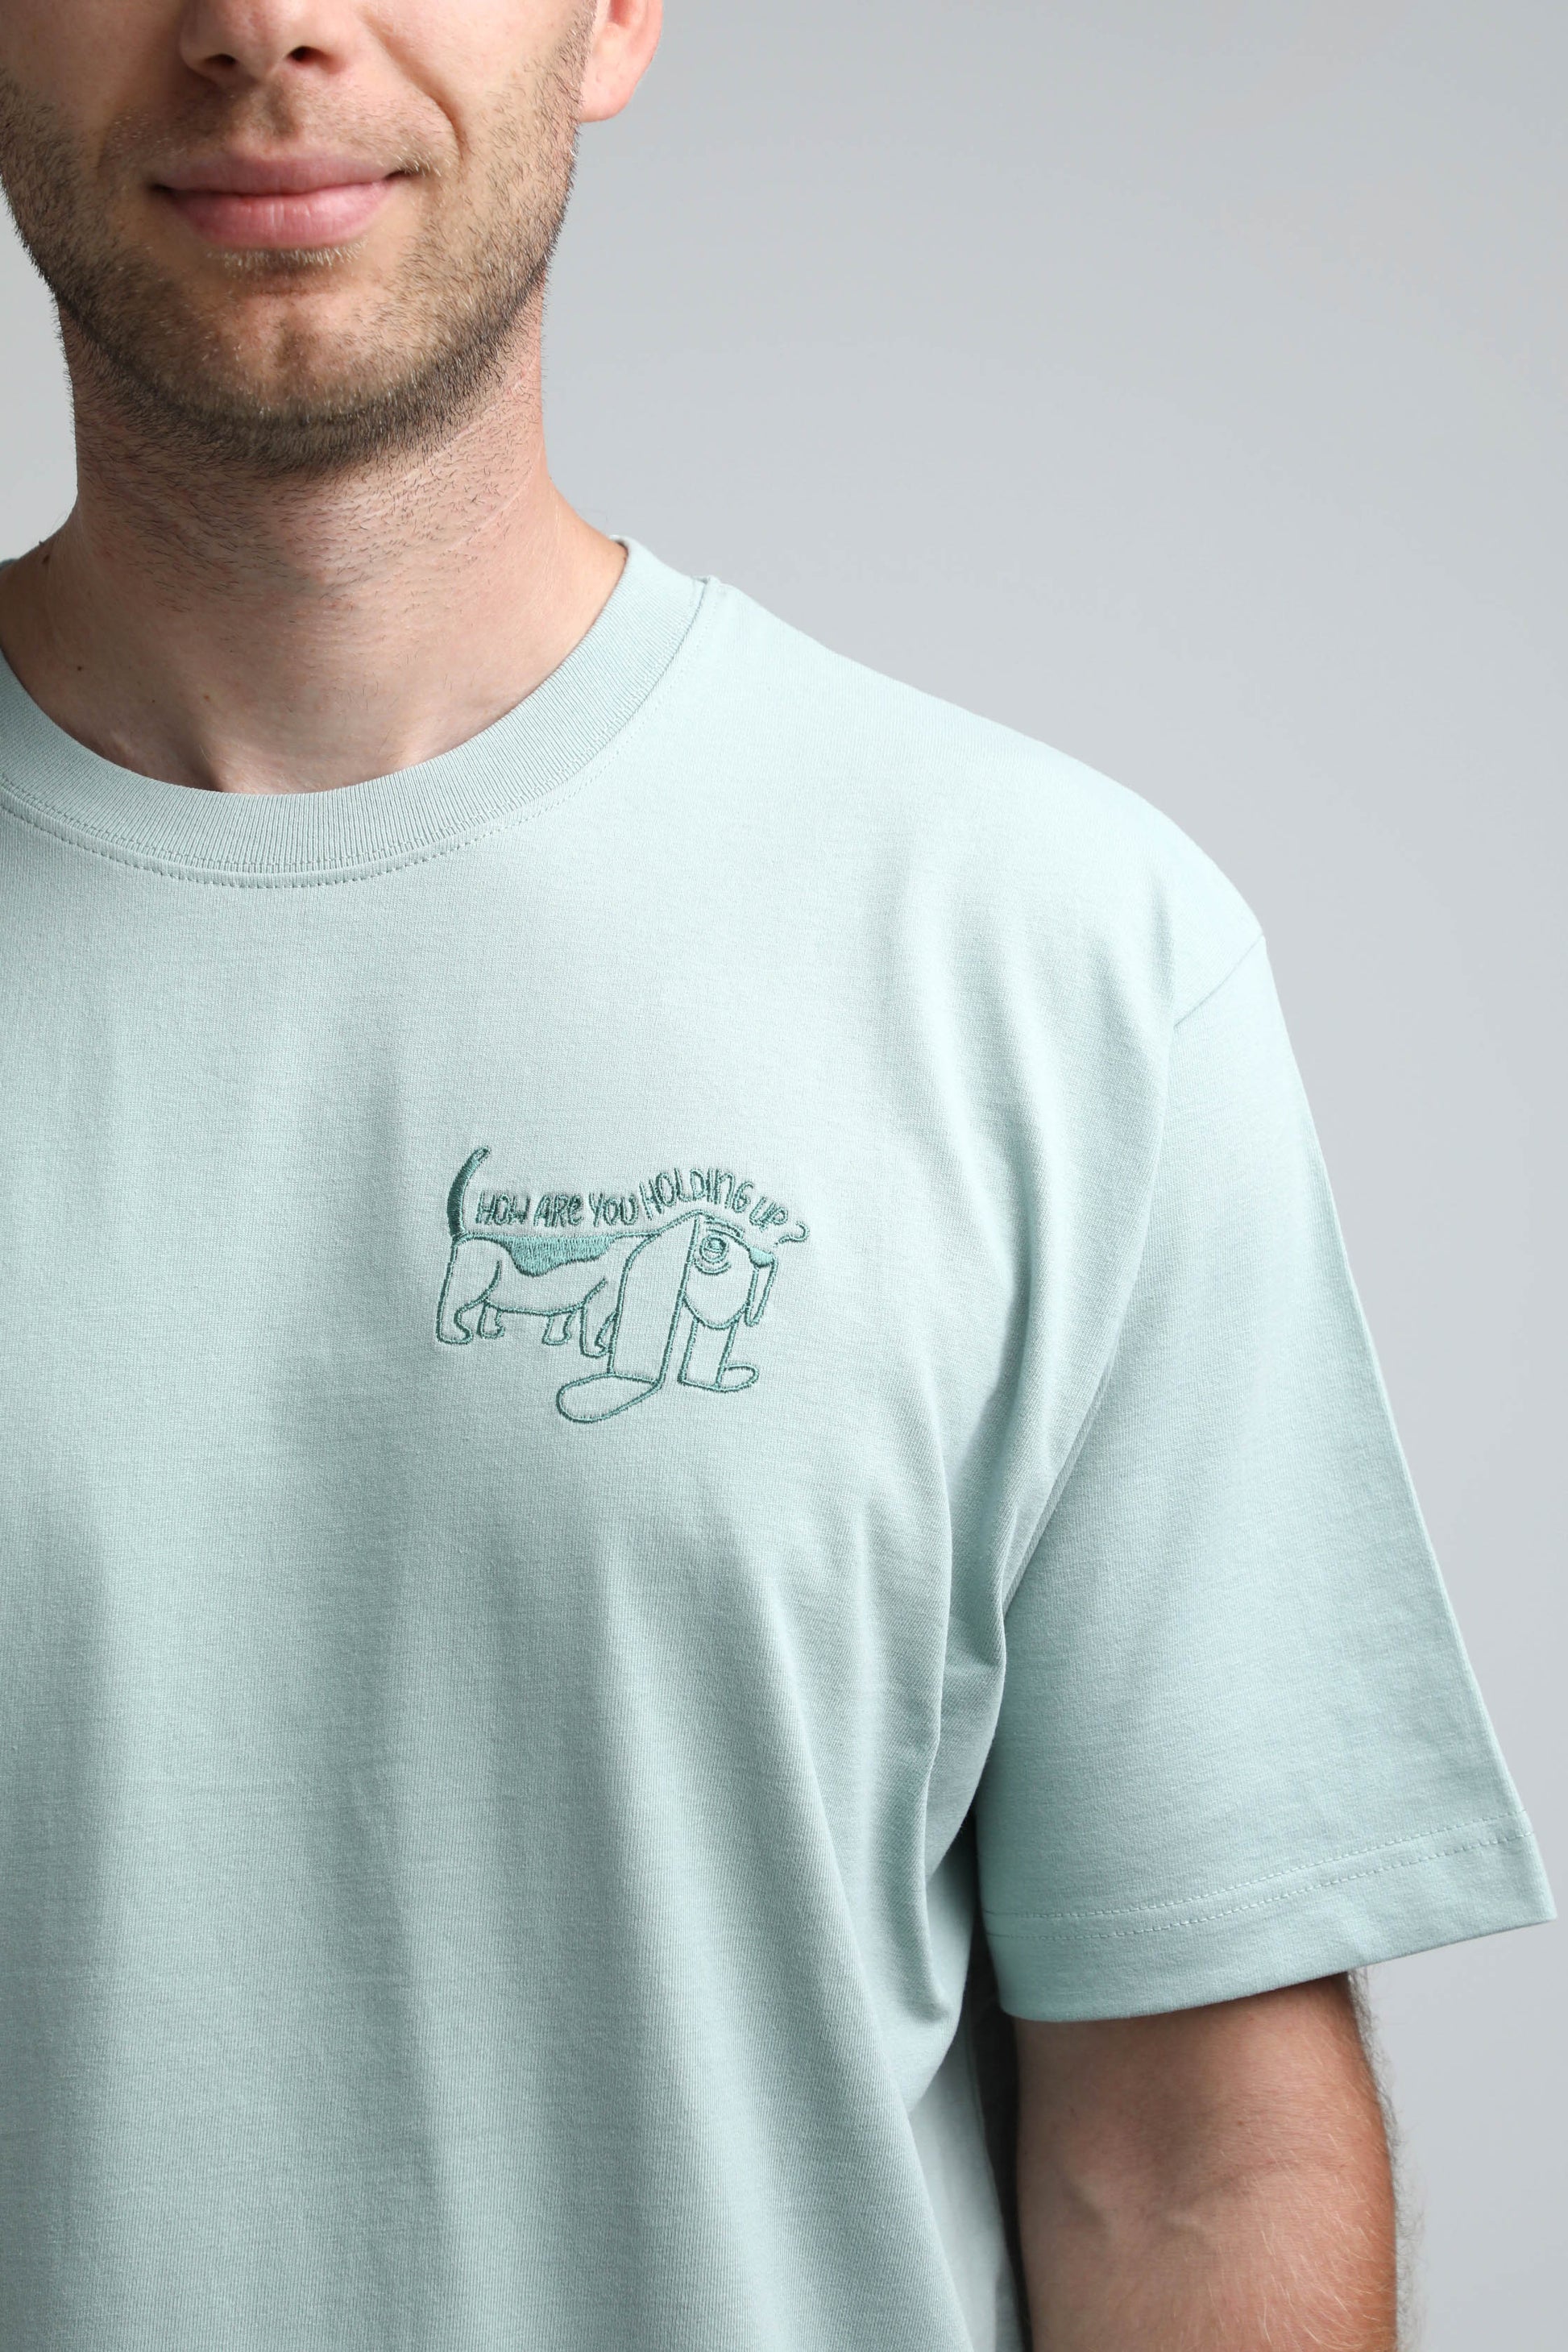 -25% | S available only | How are you holding up? | Heavyweight T-Shirt with embroidered dog. Oversized | Unisex - premium dog goods handmade in Europe by My Wild Other